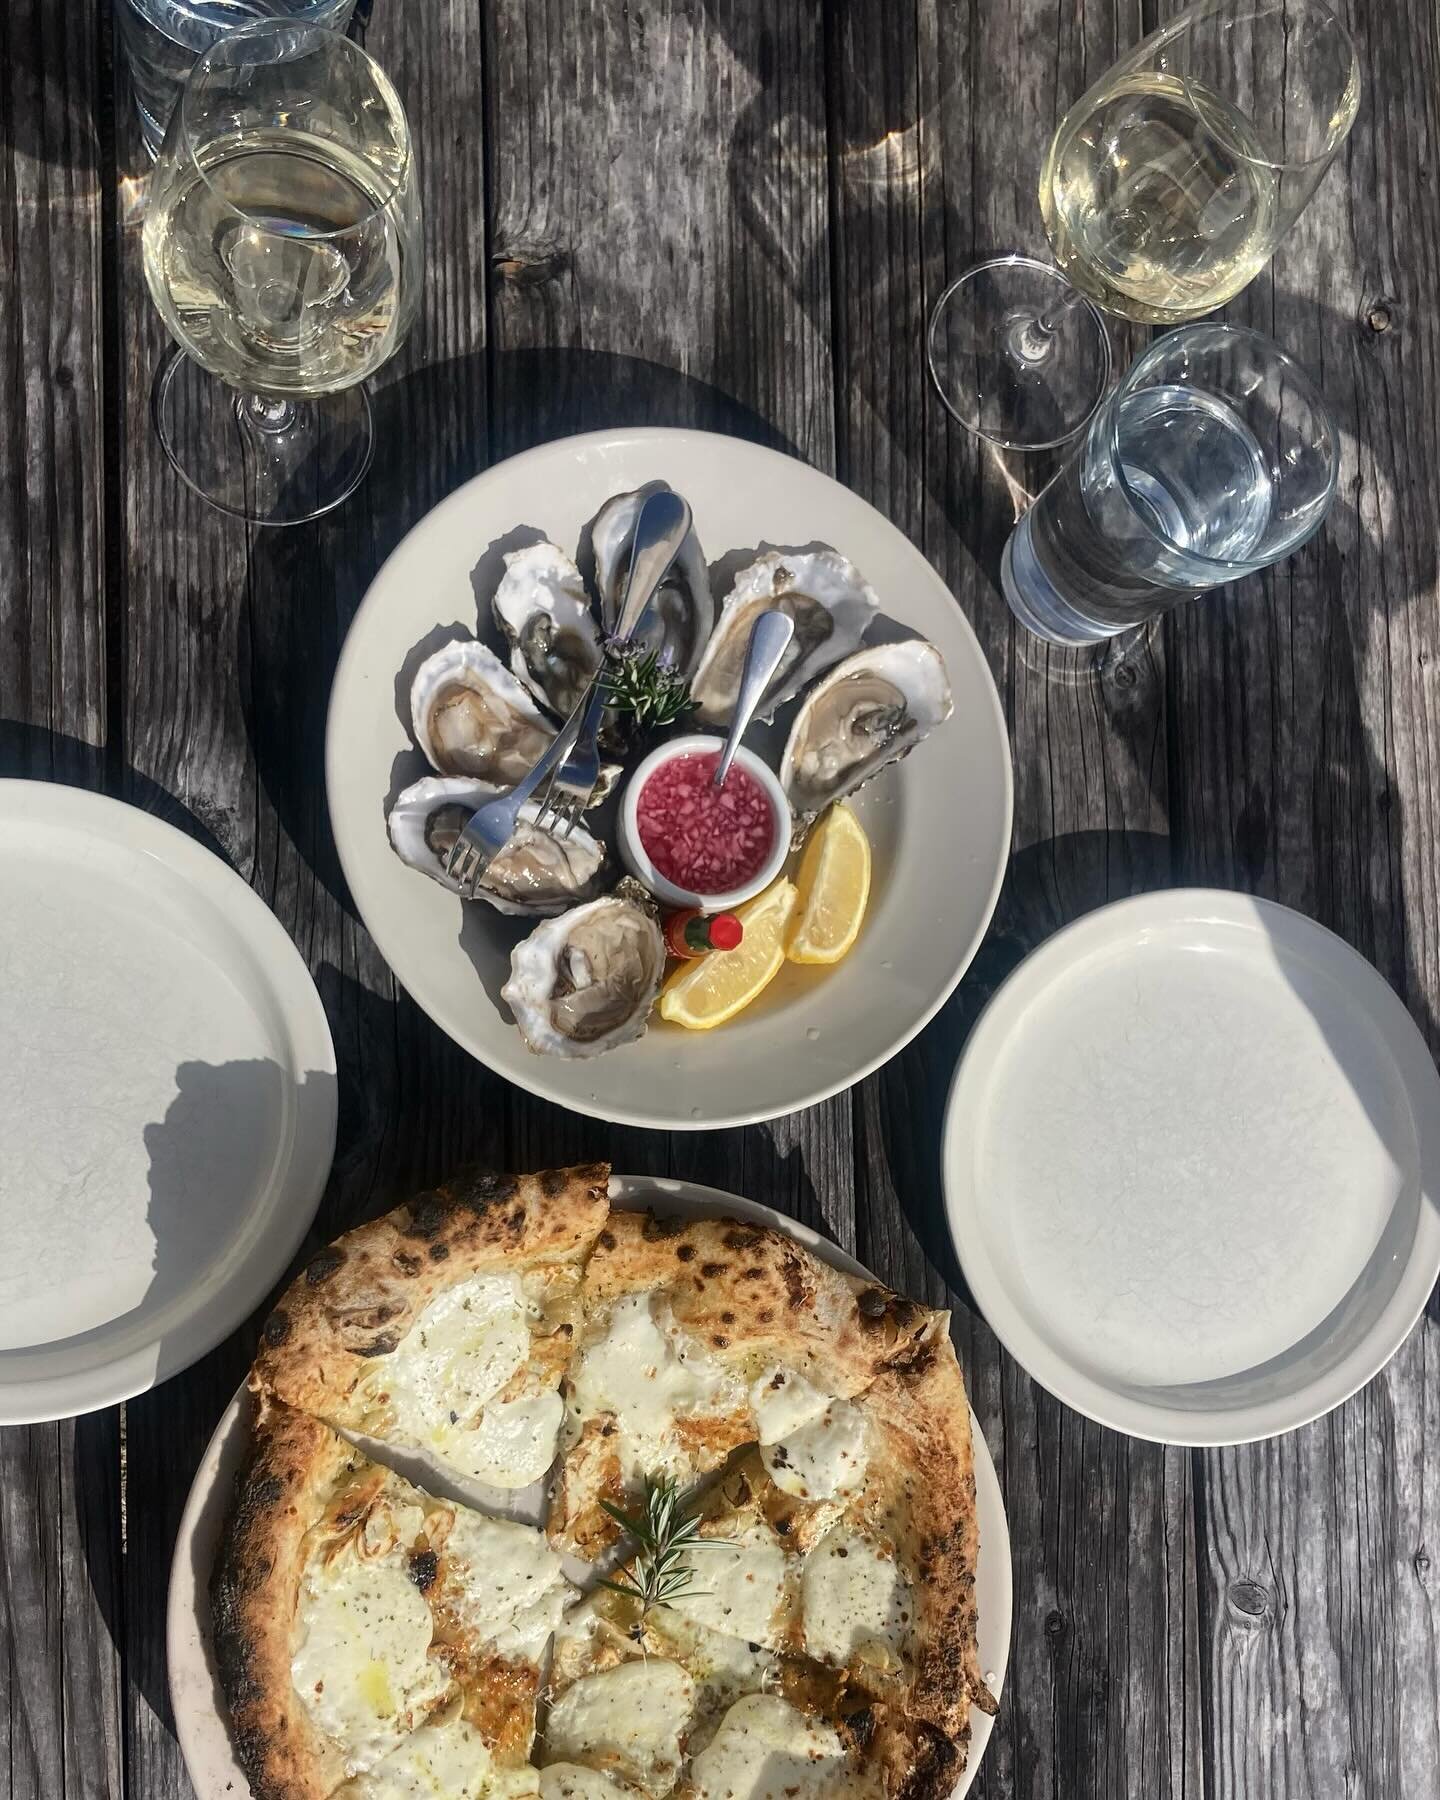 Here&rsquo;s to sharing a winter lunch in the sun, finally meeting a longtime Instagram friend in person (in @cornelia.craft&rsquo;s childhood backyard no less) and catching up over local oysters and wood fired pizza on some of the themes shared here